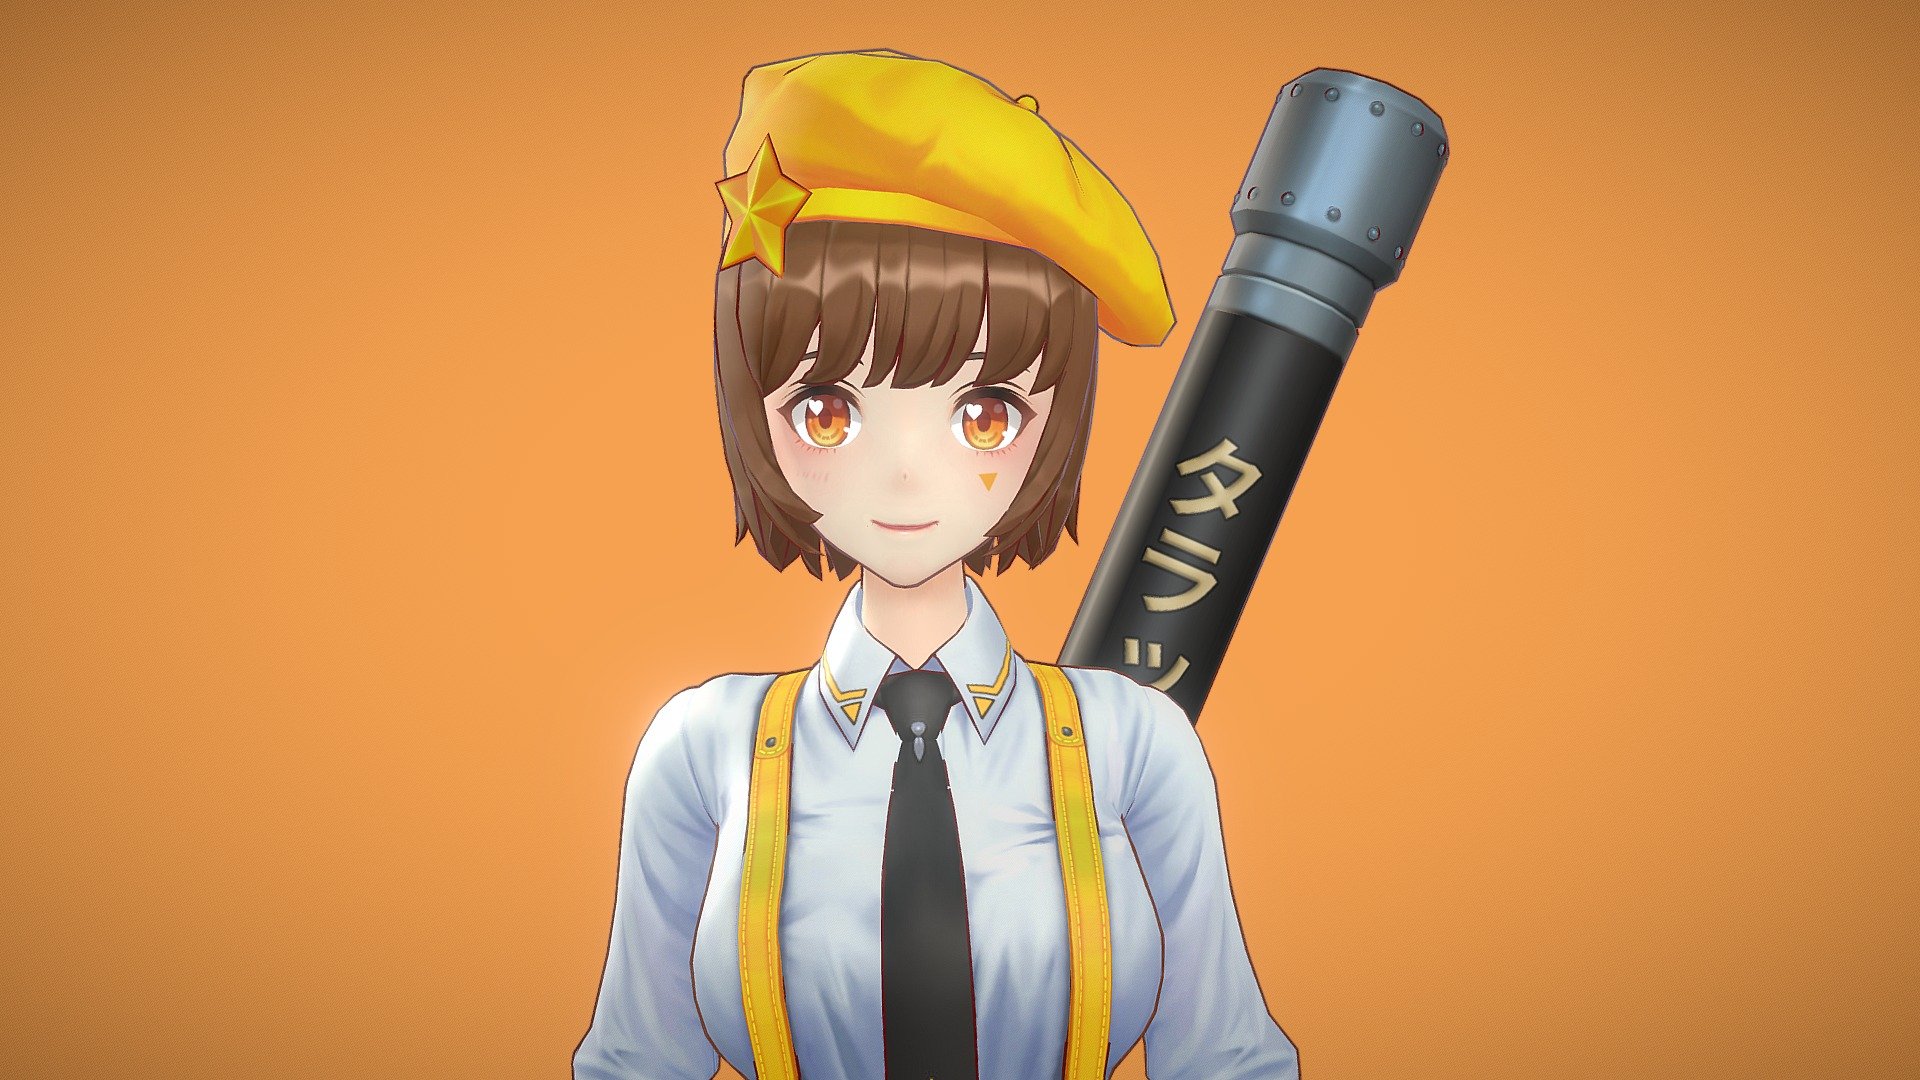 Hello,

In my project, I designed a character with a school concept and completed 3D modeling.
This character is based on an art club theme. I have uploaded it to Sketchfab so it can be viewed in a 3D viewer.
You may refer to the modeling, but commercial use is not allowed.
Thank you.

안녕하세요

저는 프로젝트에서 스쿨컨셉에 캐릭터를 기획하고 3d모델링 했습니다.
이 캐릭터는 미술부 컨셉에 캐릭터 입니다. 3D 뷰어로 볼 수 있도록 스케치팹에 업로드했습니다.
모델링을 참고하실 수는 있지만, 상업적 사용은 허용되지 않습니다.
감사합니다.

ⓒ 2022. (NovaCore) all rights reserved 3d model